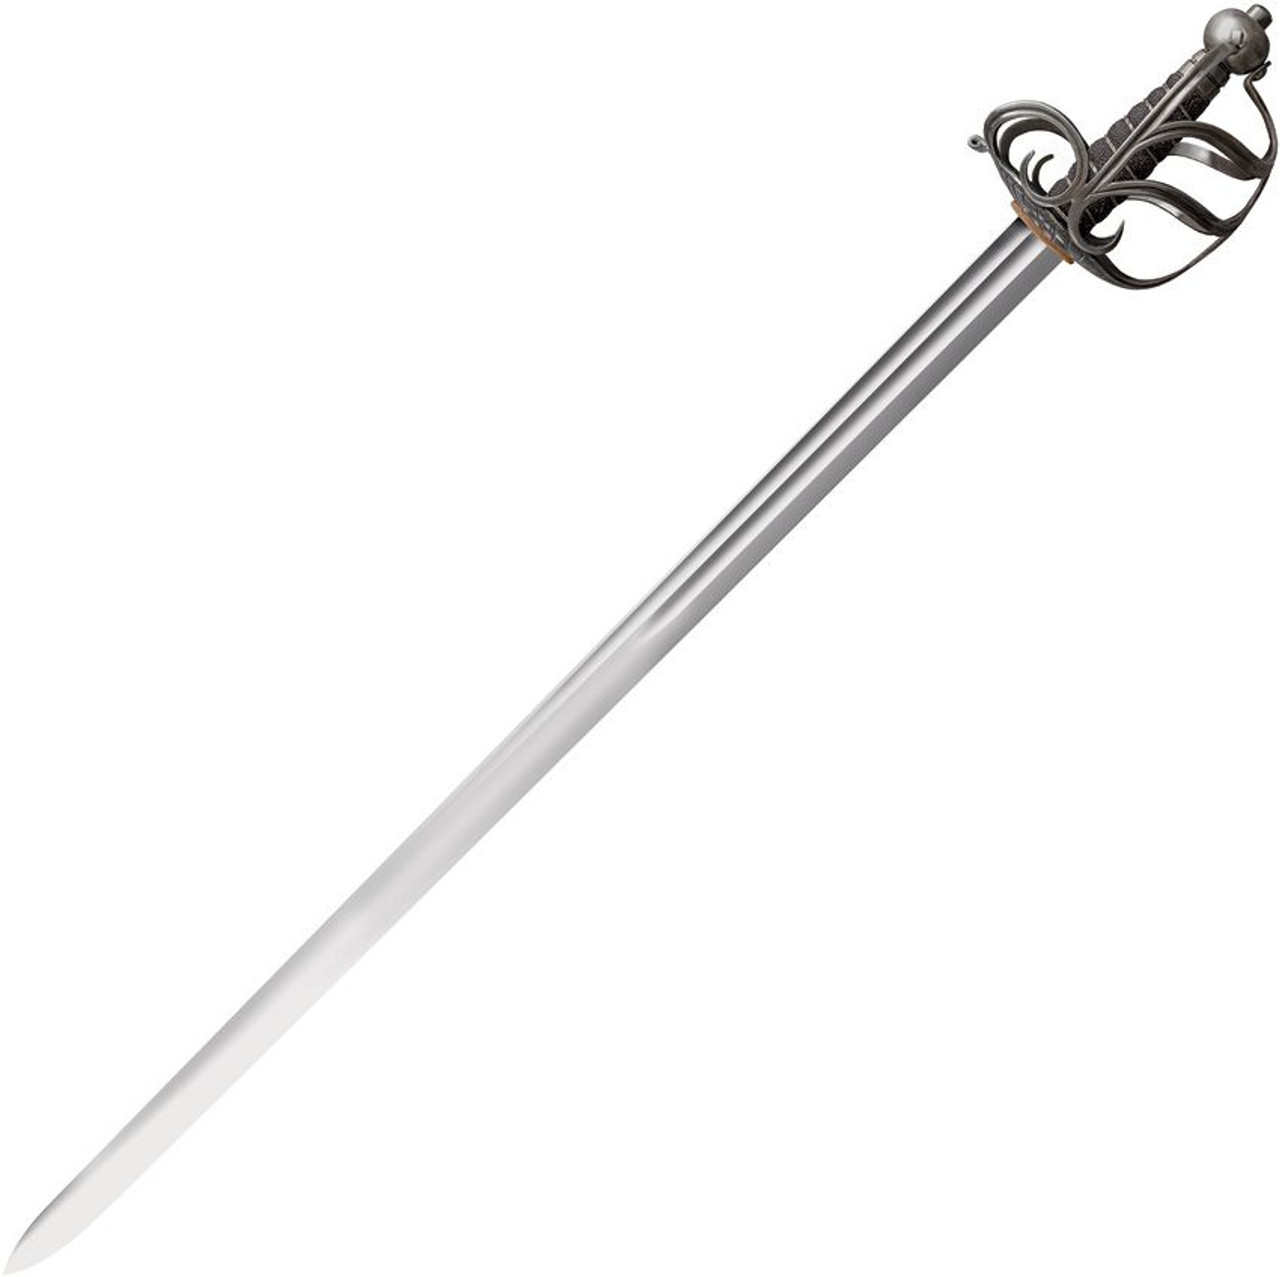 Cold Steel English Back Sword (88SEB) 32" 1055 Standard Plain Blade, Cast Metal Handle with Full Guard, Black Leather Scabbard